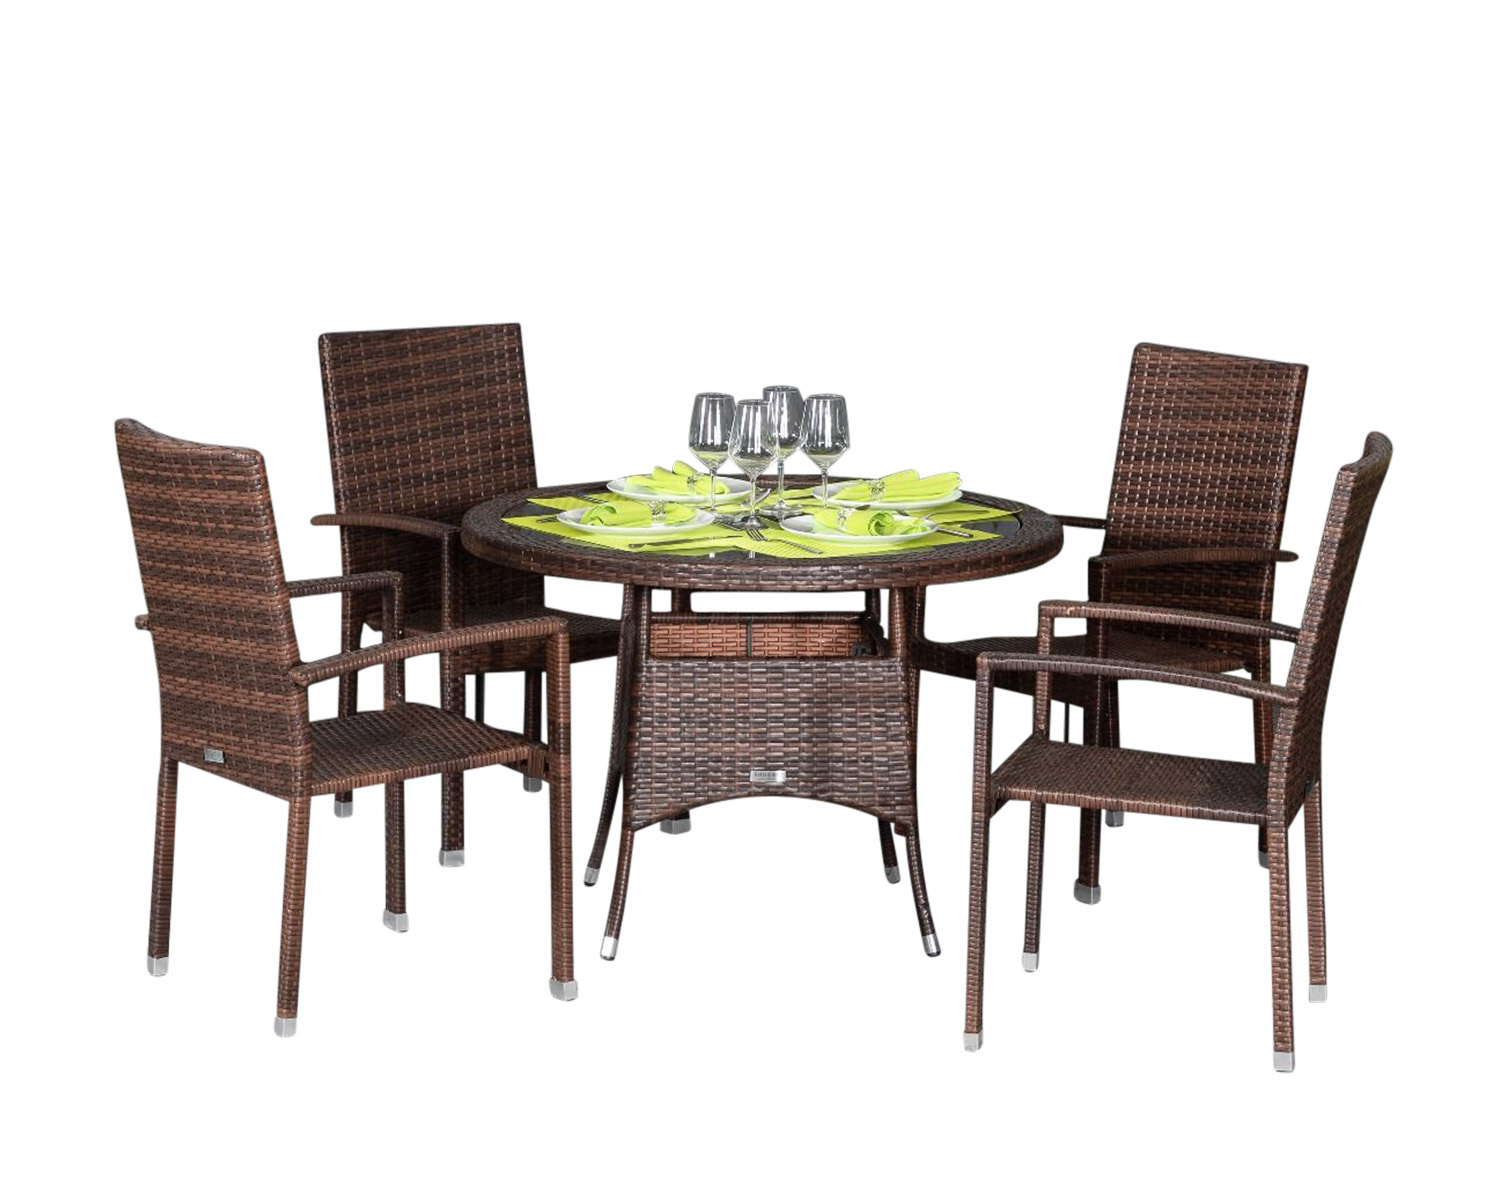 4 Seat Rattan Garden Dining Set With Small Round Dining Table In Brown Rio Rattan Direct